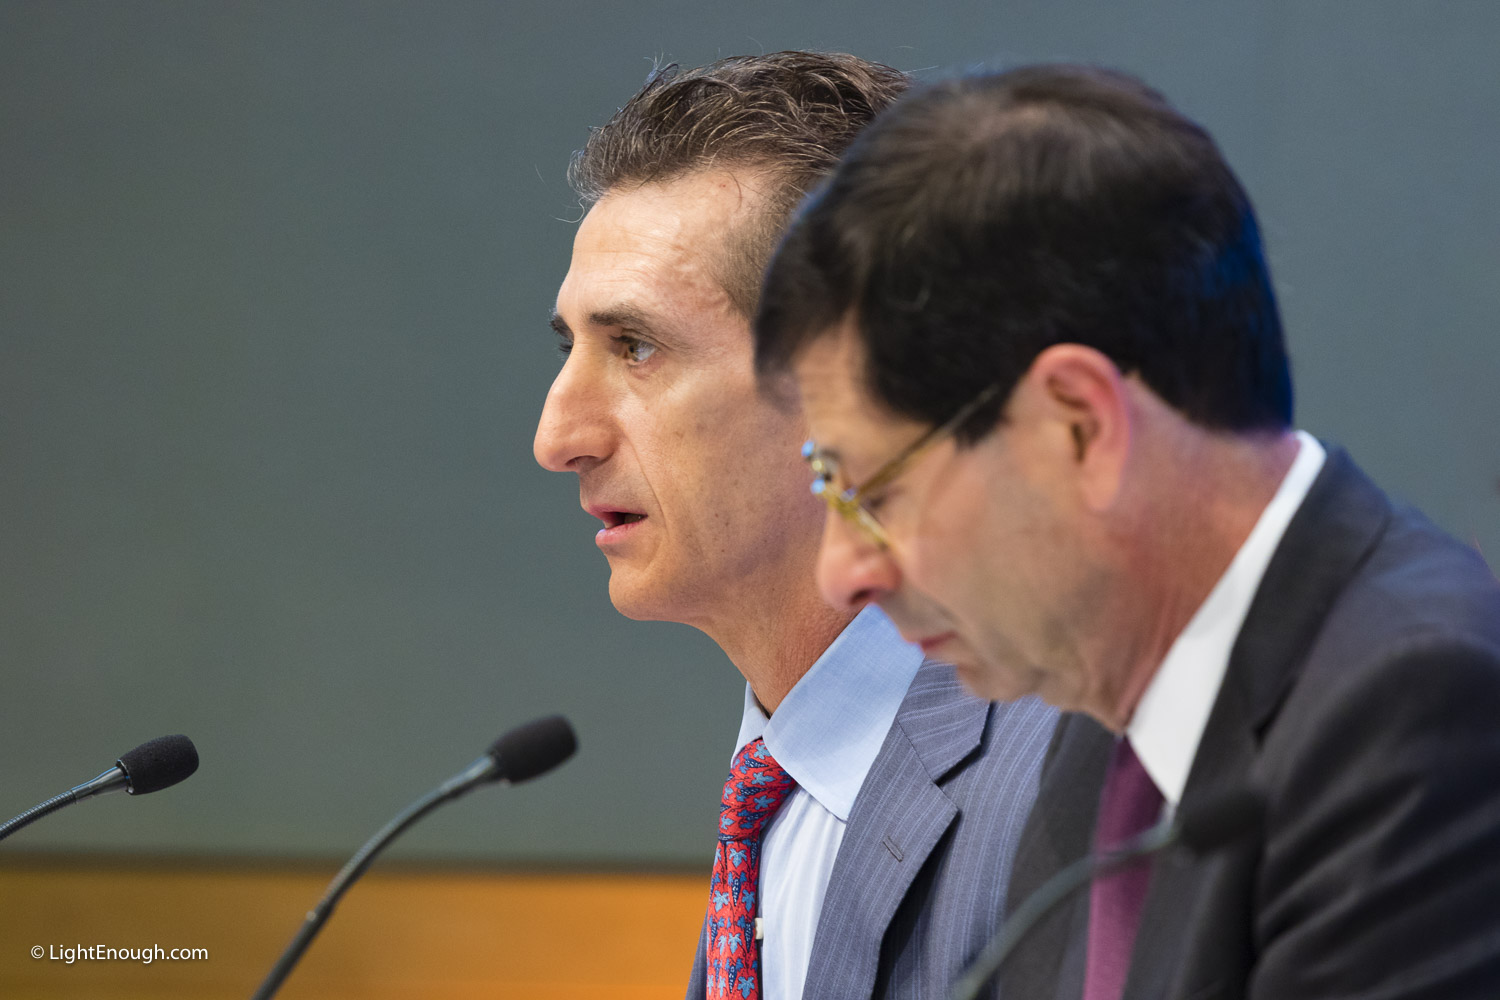  L-R: IMF Deputy Director Gian Maria Milesi-Ferretti, and Economic Counsellor Maurice Obstfeld at the World Economic Outlook Press Conference at IMF headquarters in  Washington, DC on October 4, 2016. Photo by John St Hilaire / LightEnough.com 